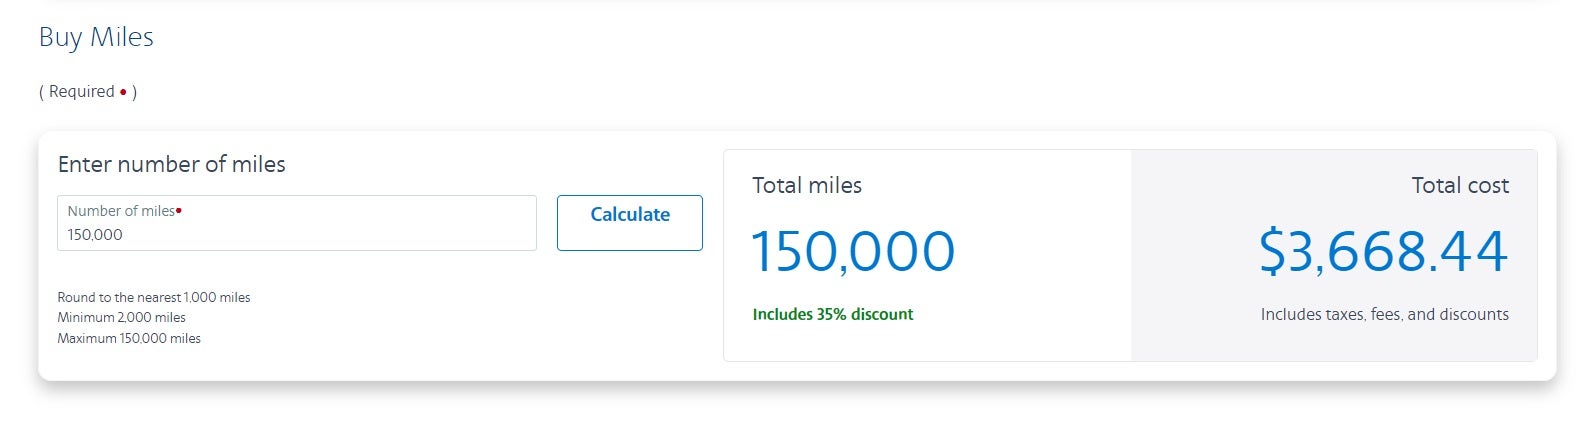 screenshot of total miles purchased